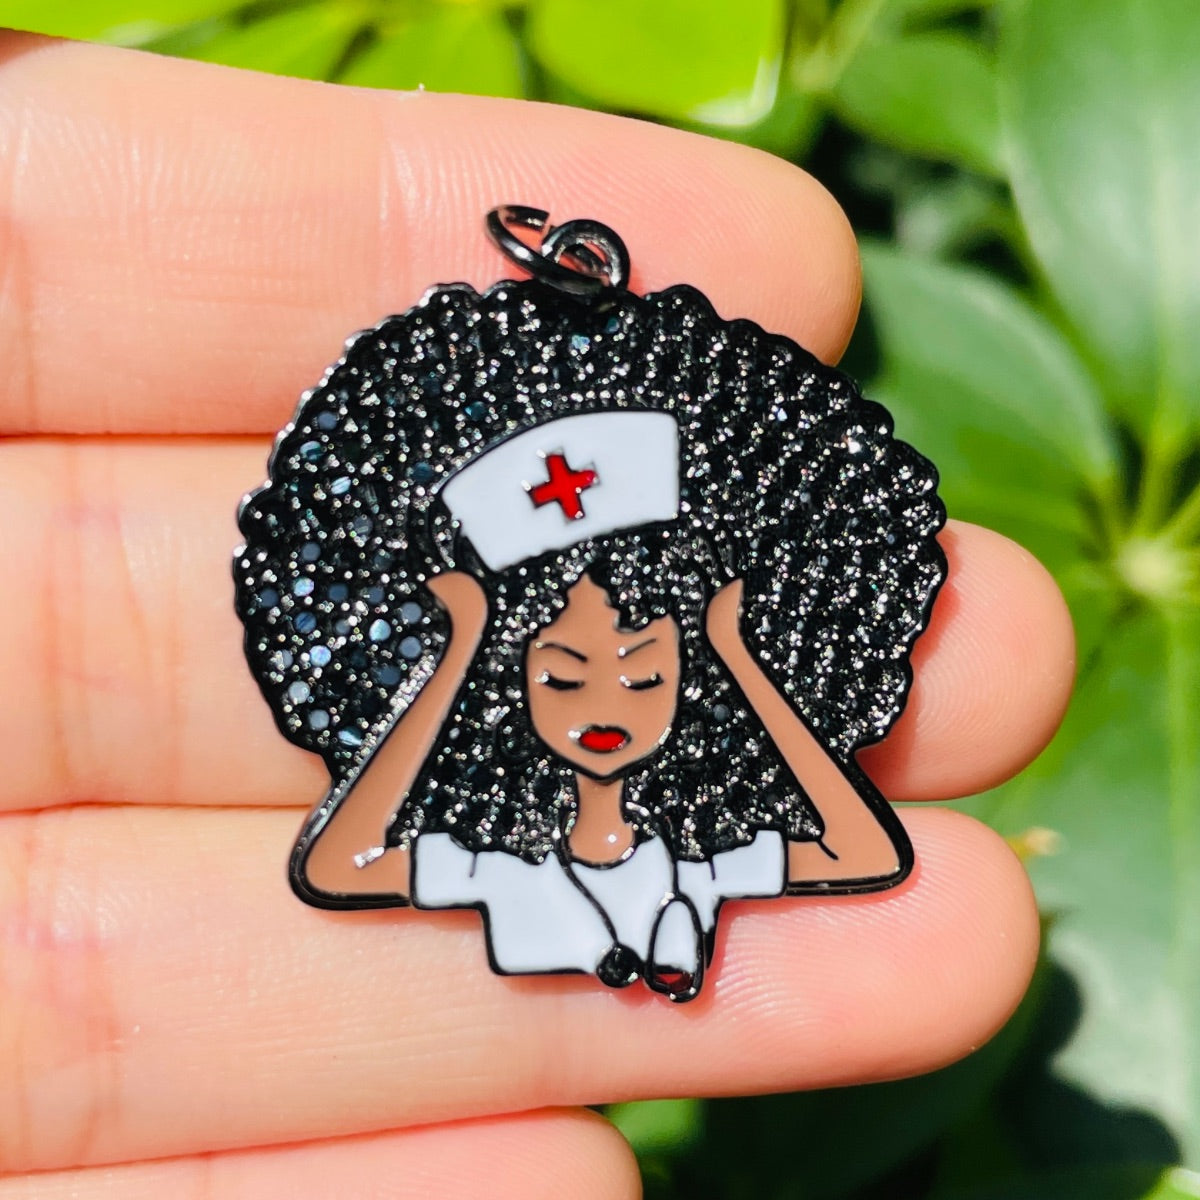 Shop For Cute Wholesale nurse charms That Are Trendy And Stylish